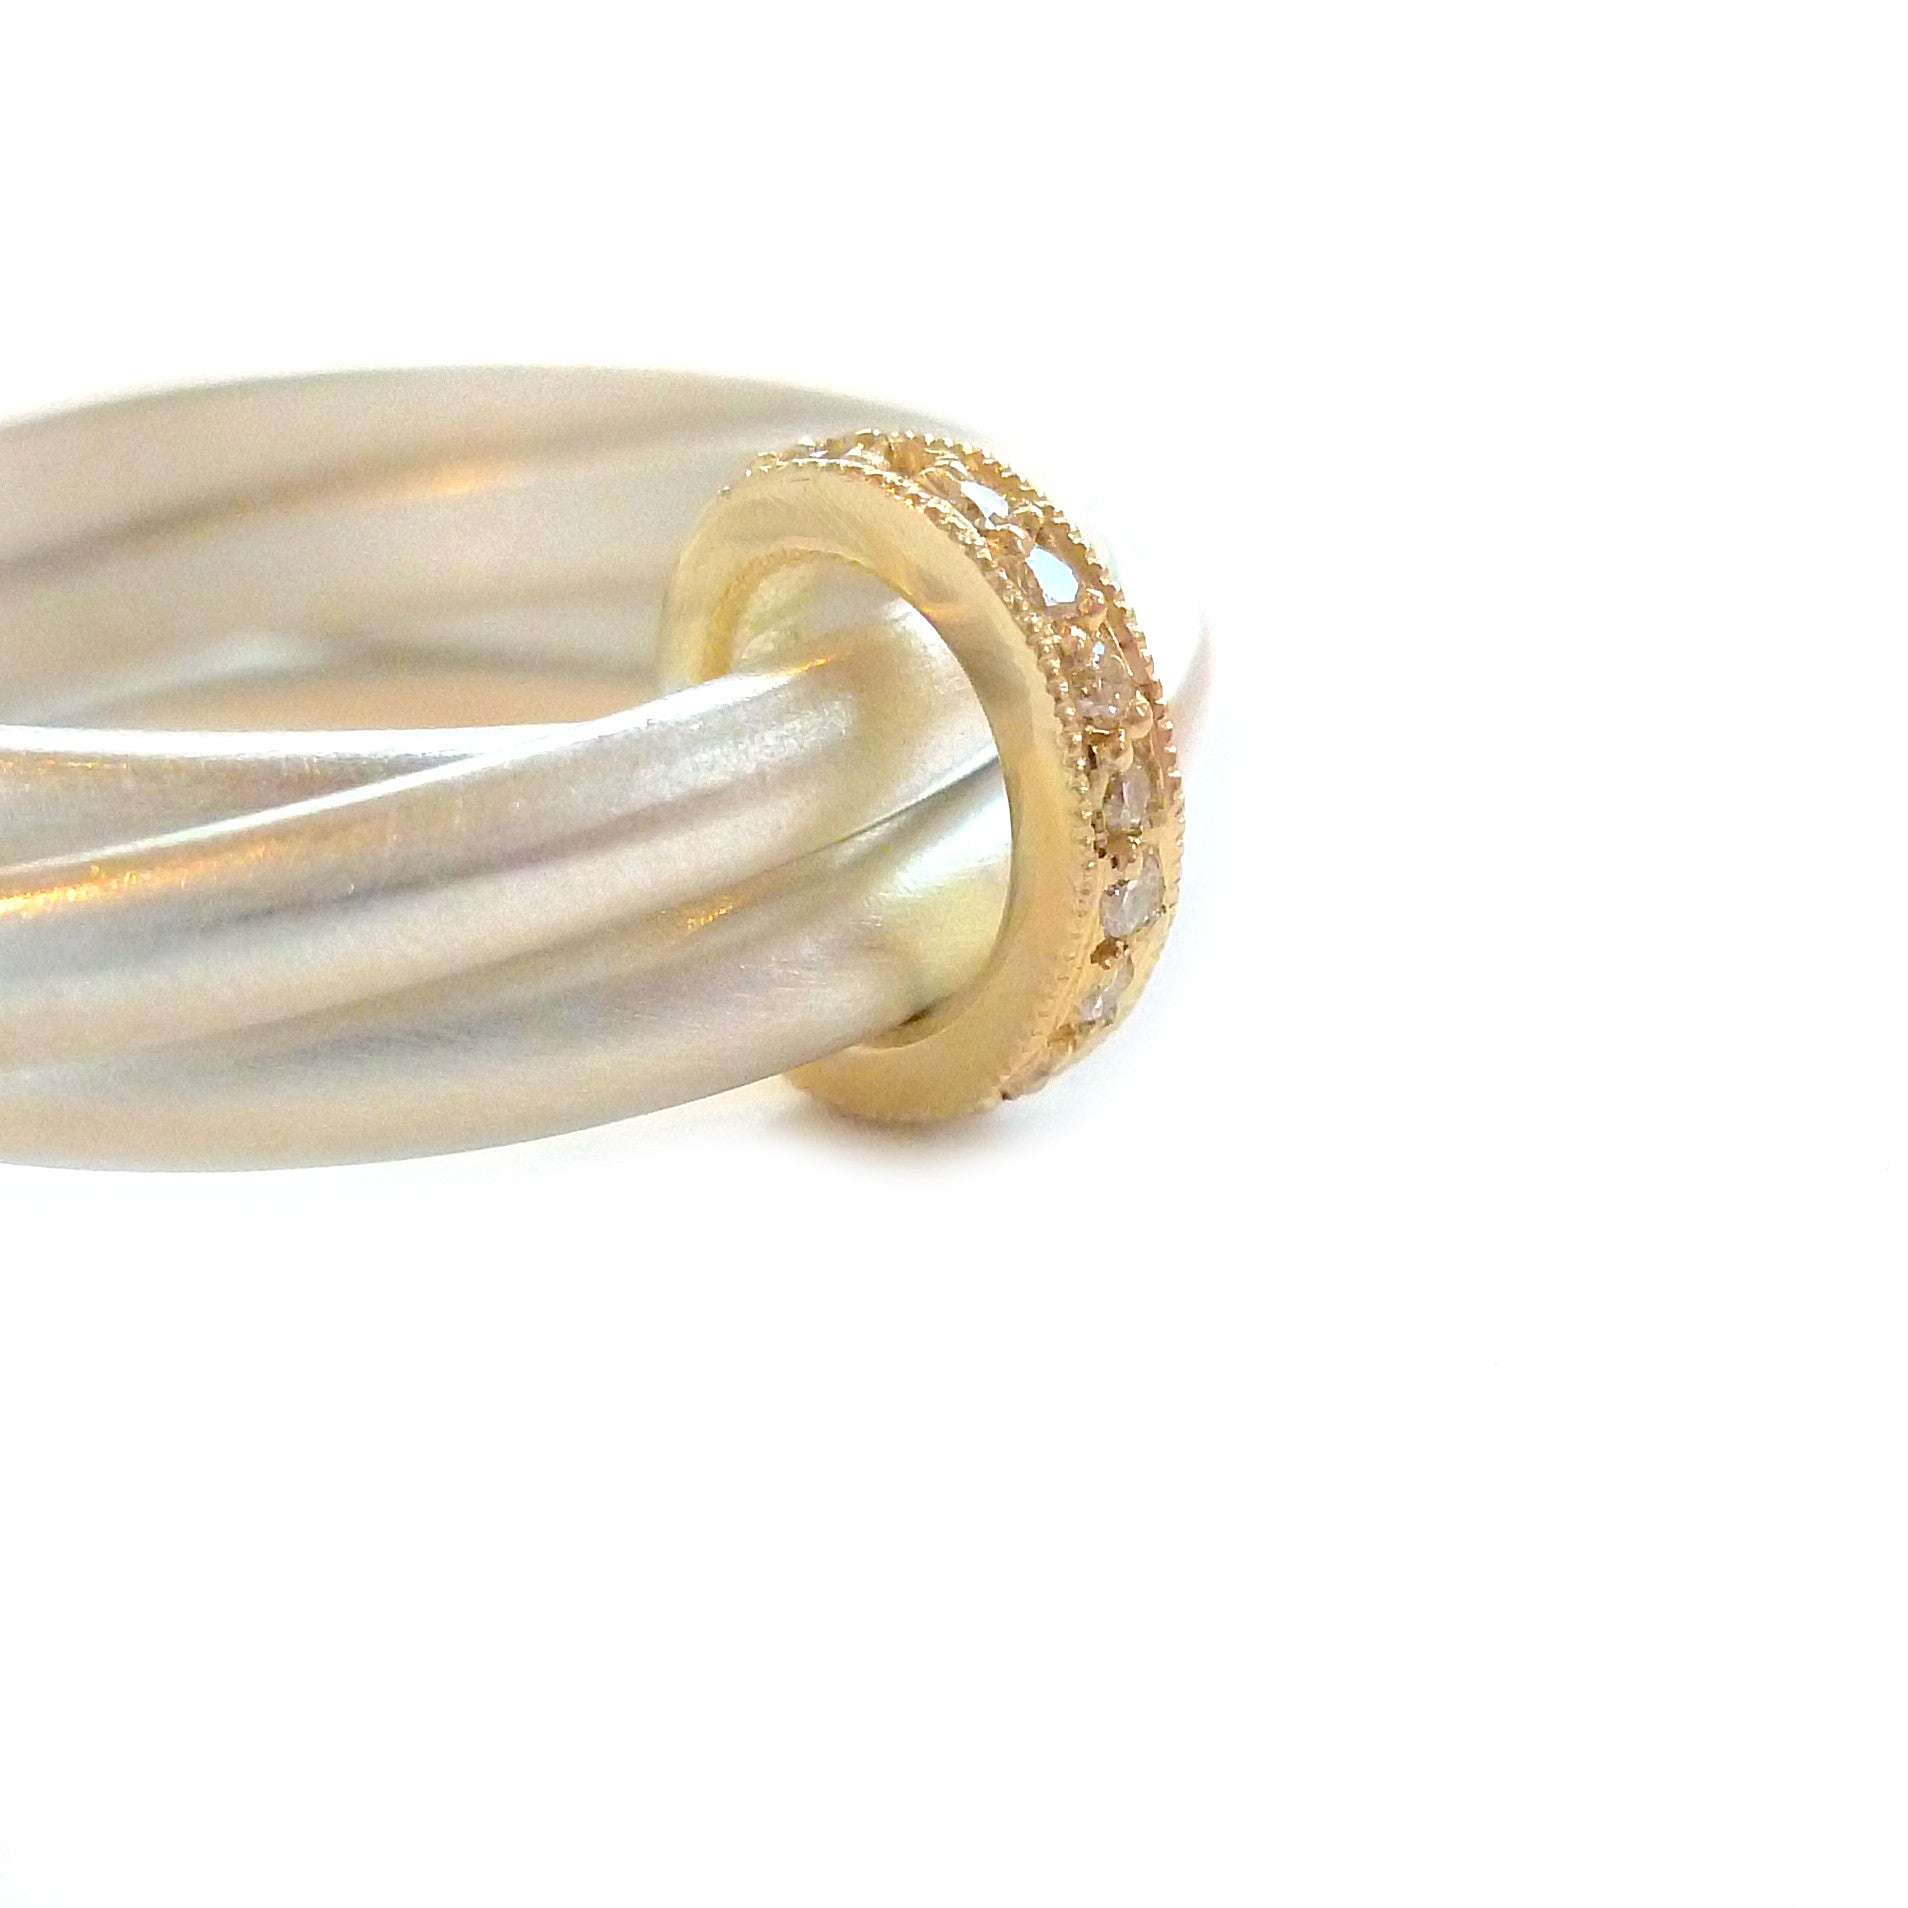 Unusual, unique, bespoke and modern 18k yellow gold, diamond and silver wedding ring, eternity ring, brushed finish. Handmade by Sue Lane in Herefordshire, UK